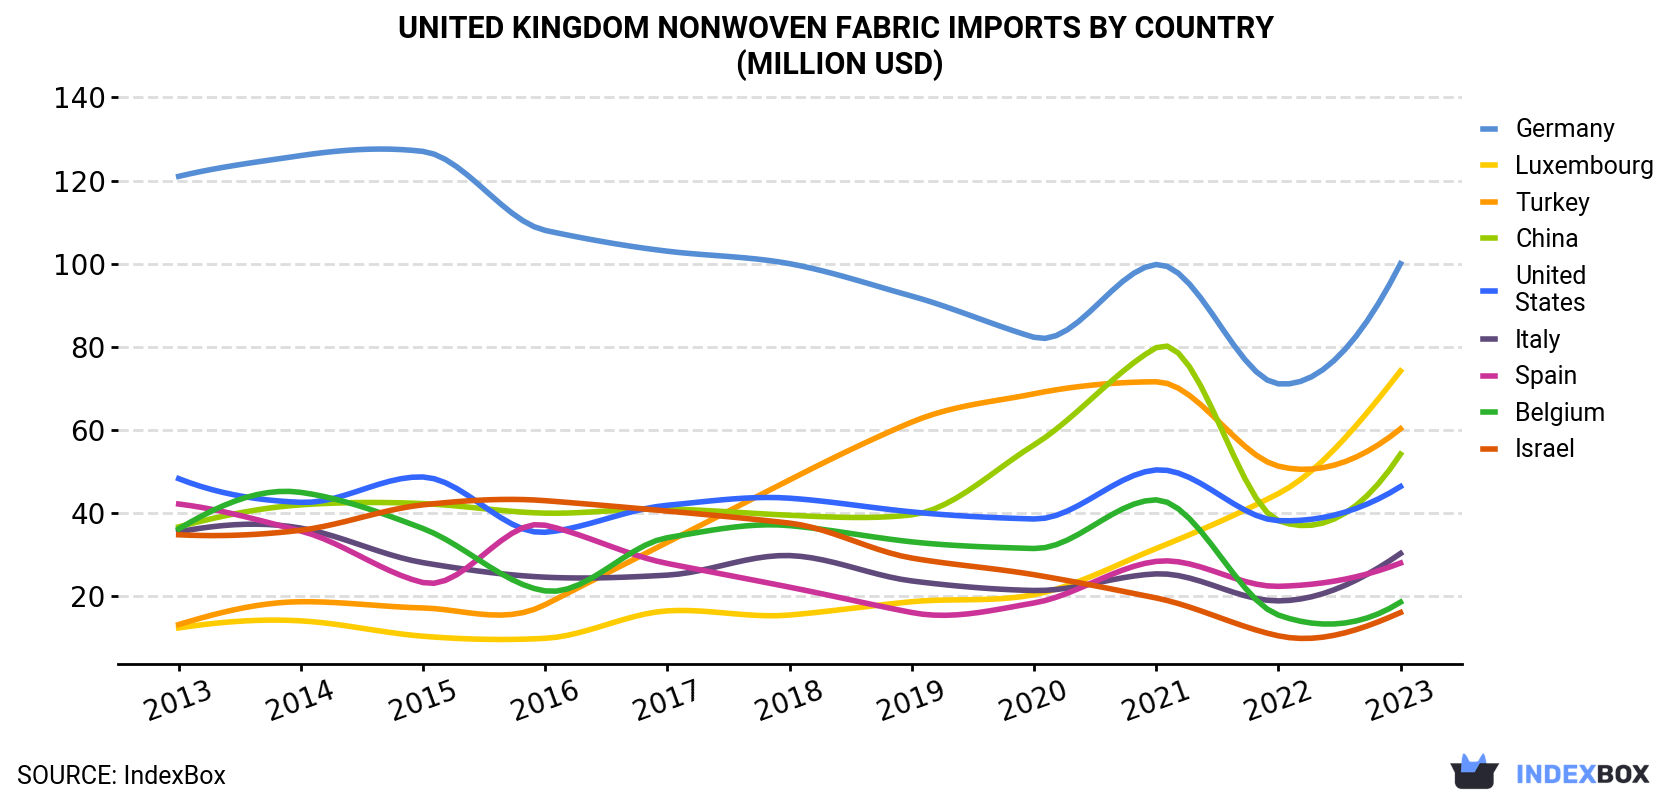 United Kingdom Nonwoven Fabric Imports By Country (Million USD)